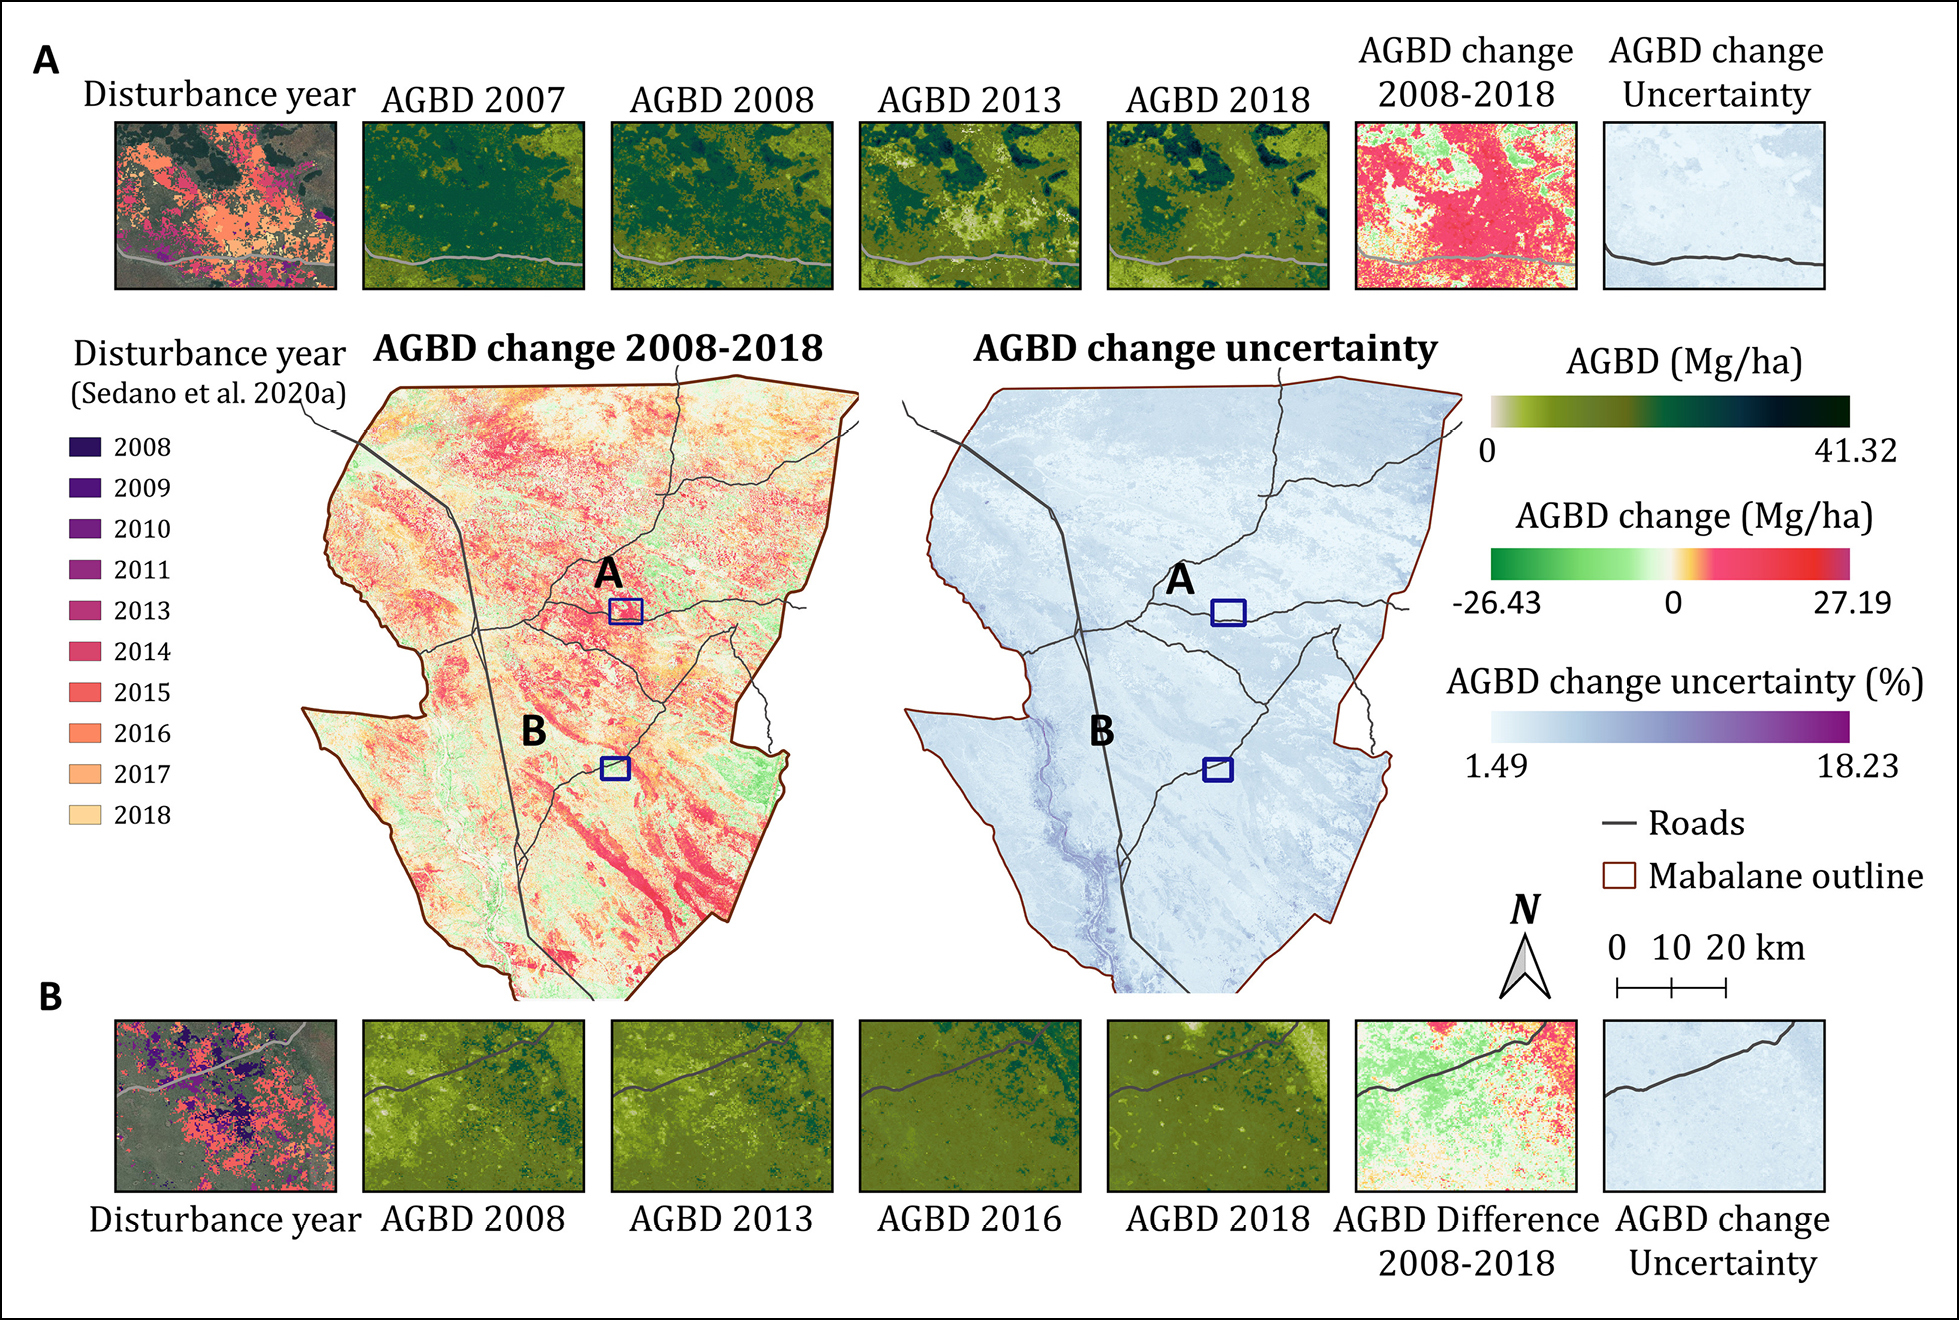 Maps of aboveground biomass density change between 2008 and 2018.